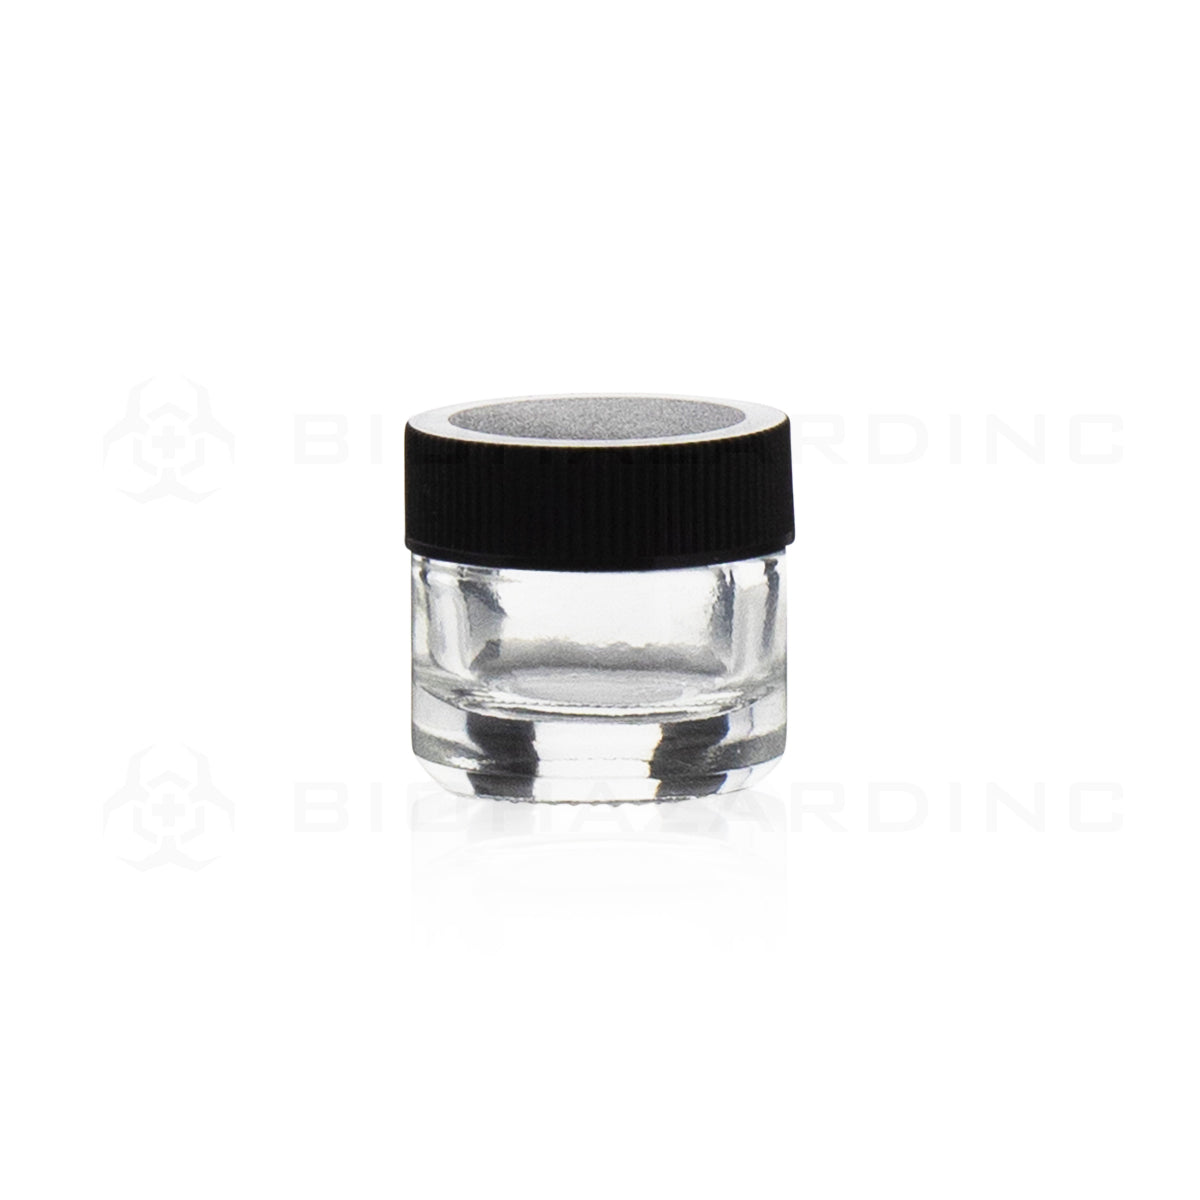 Concentrate Containers | Clear Glass Concentrate Containers w/ Black Caps | 5ml - 250 Count Concentrate Container Biohazard Inc   